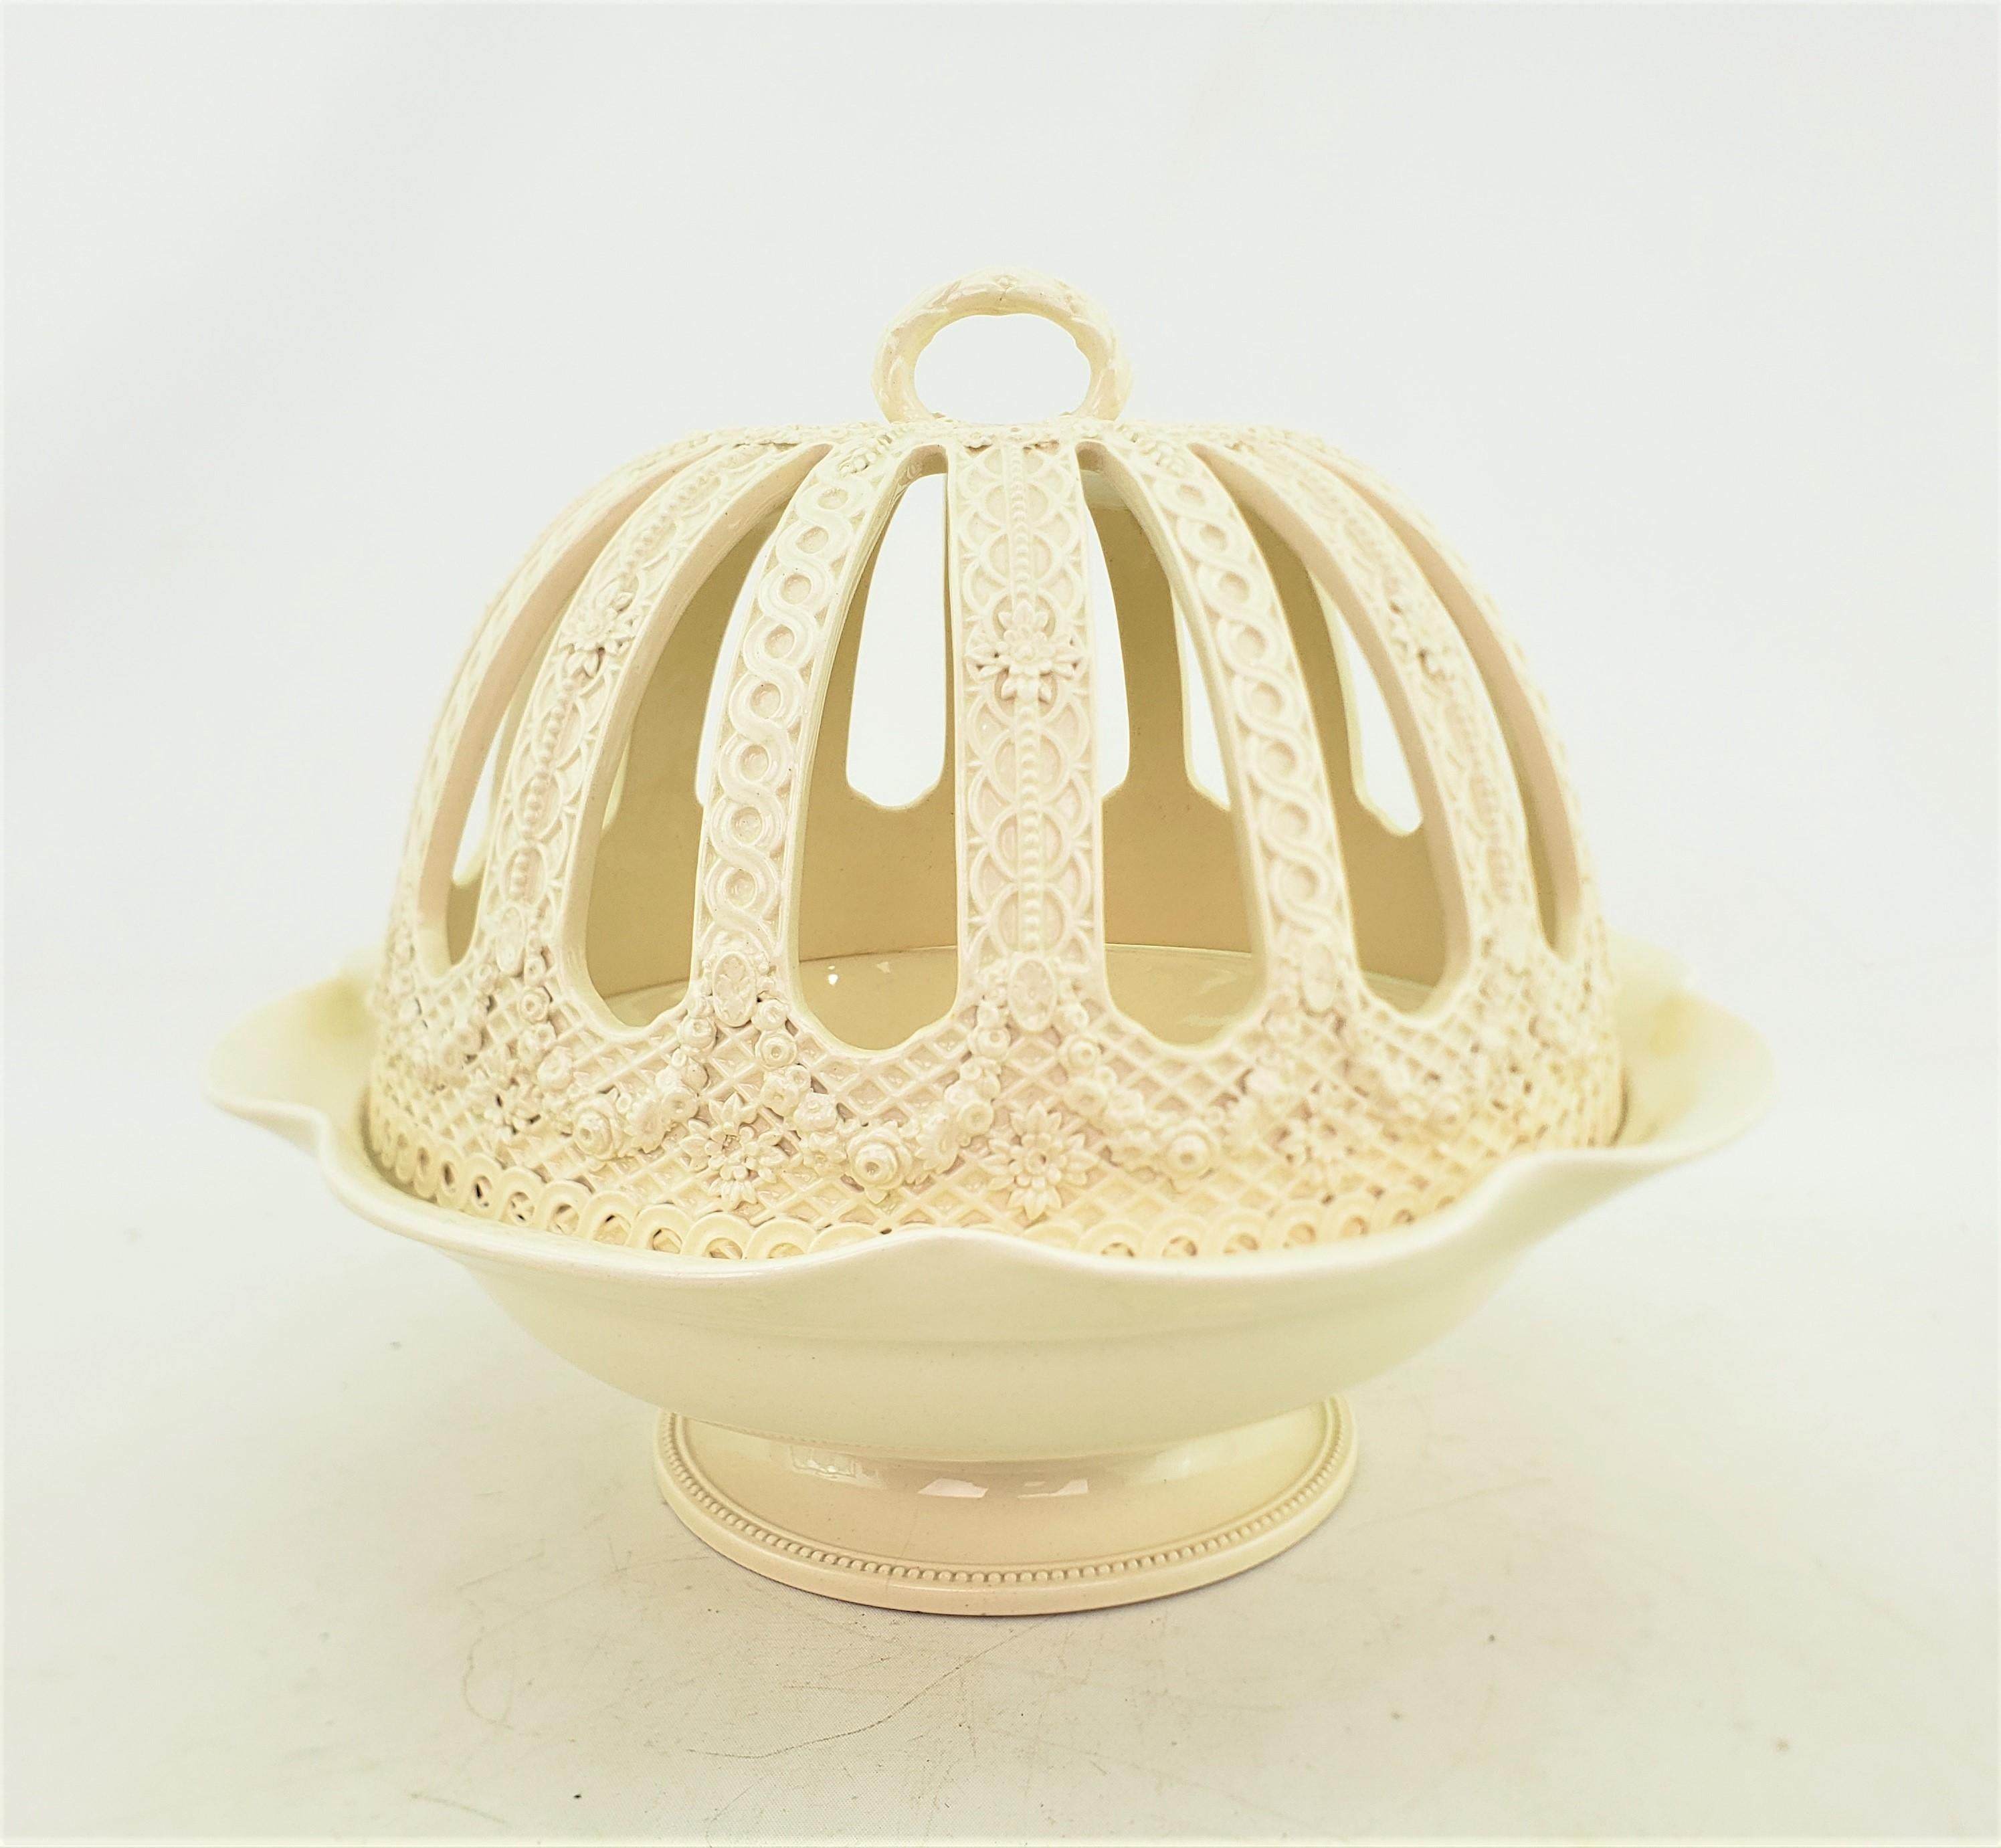 Antique Wedgwood Creamware or Queen's Ware Covered Orange Bowl In Good Condition For Sale In Hamilton, Ontario